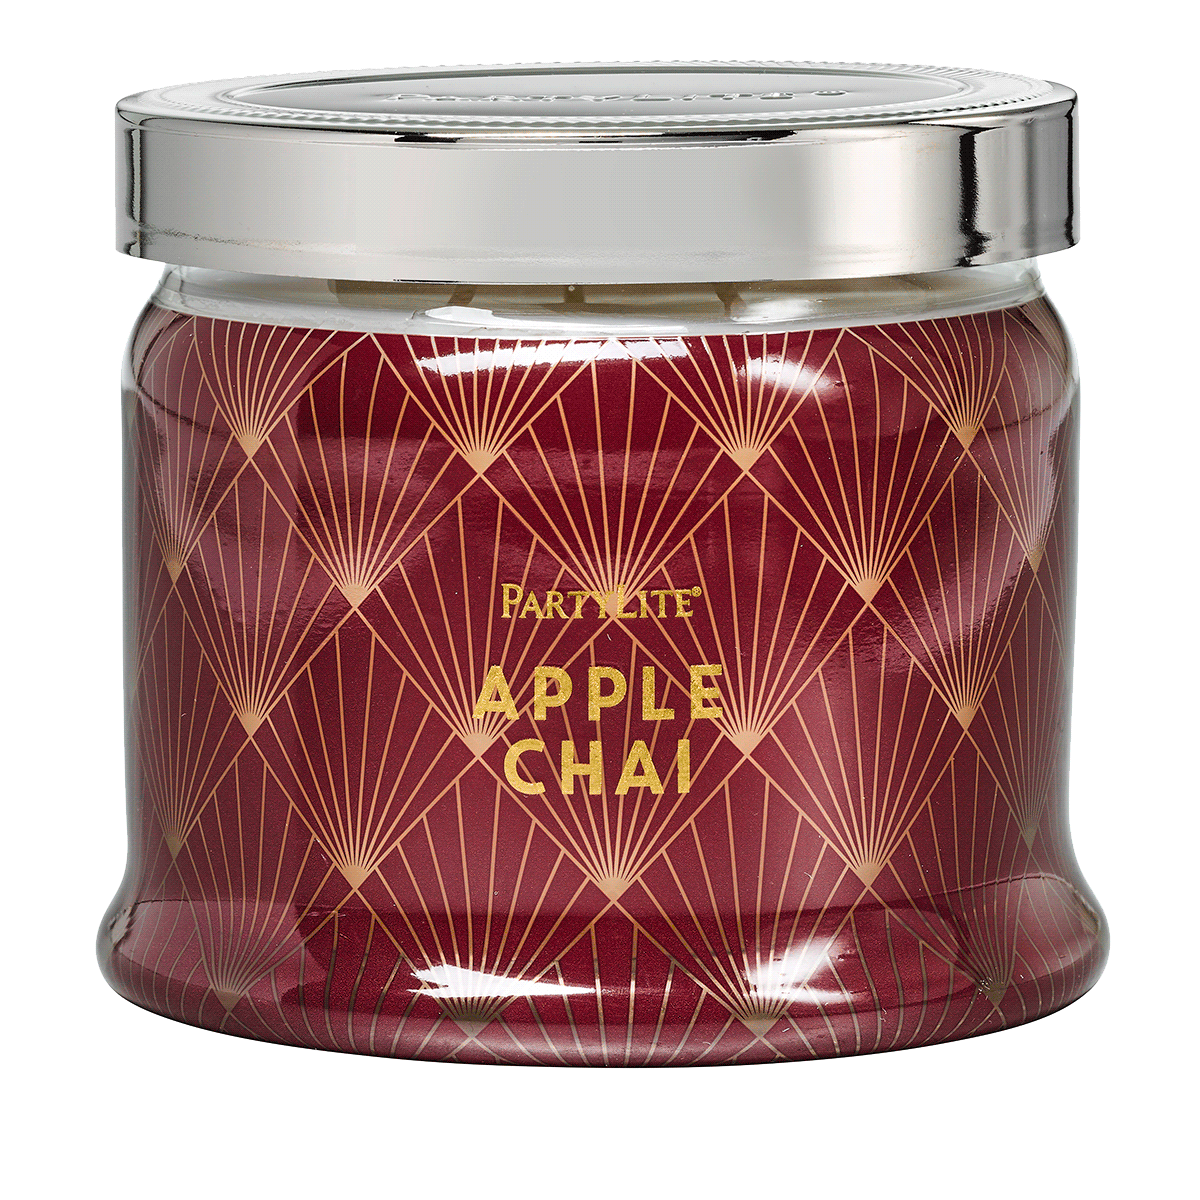 Apple Chai 3-Wick Jar Candle - PartyLite US